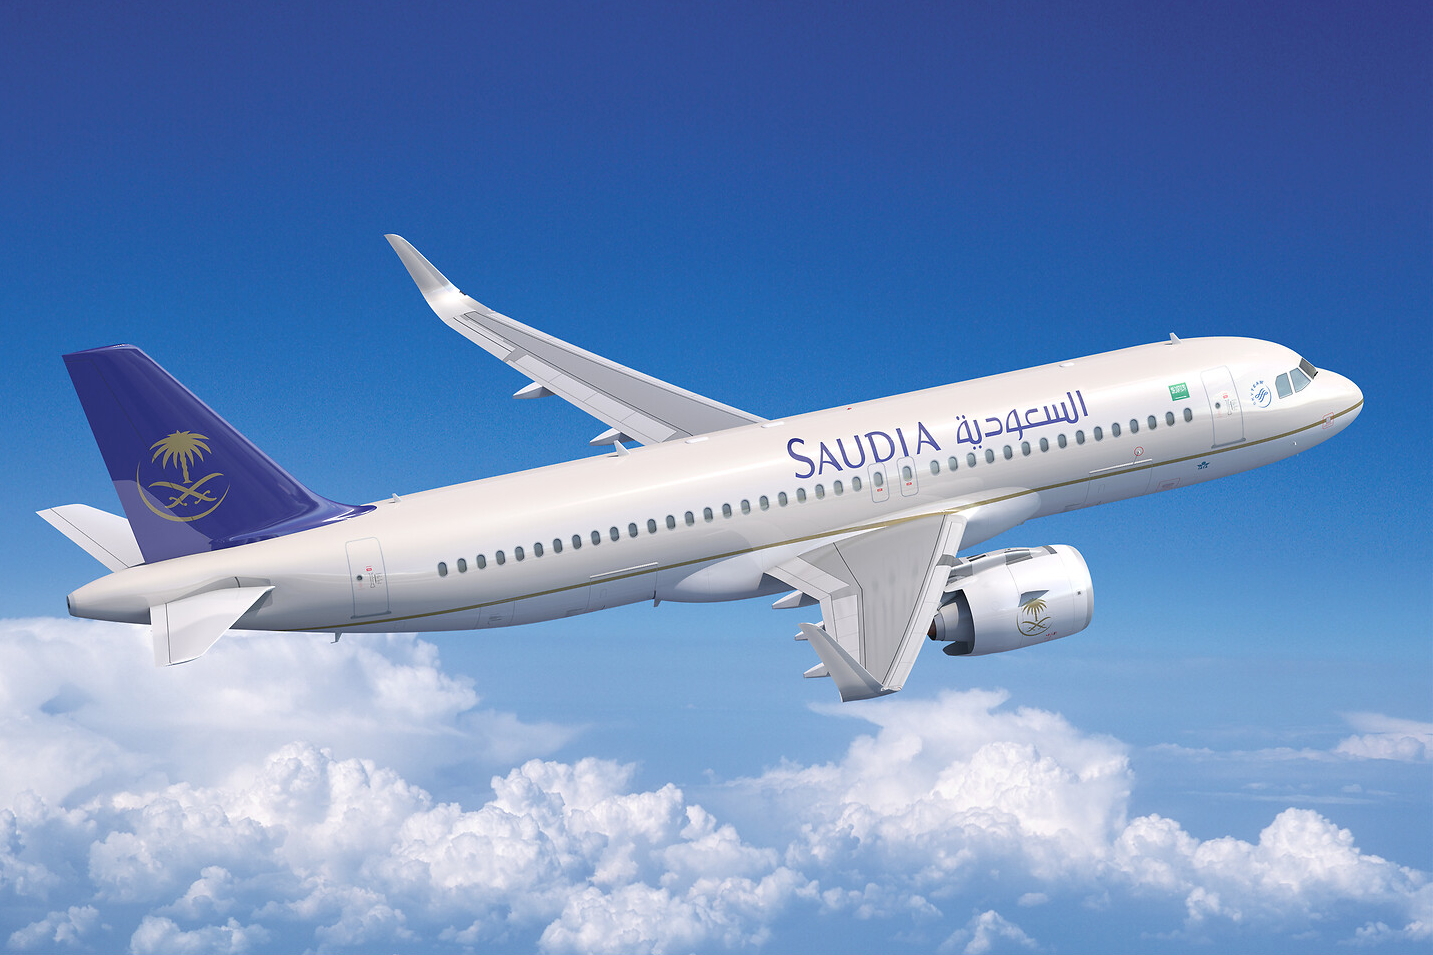 Saudi Arabian Airlines Airbus A320neo. Click to enlarge.